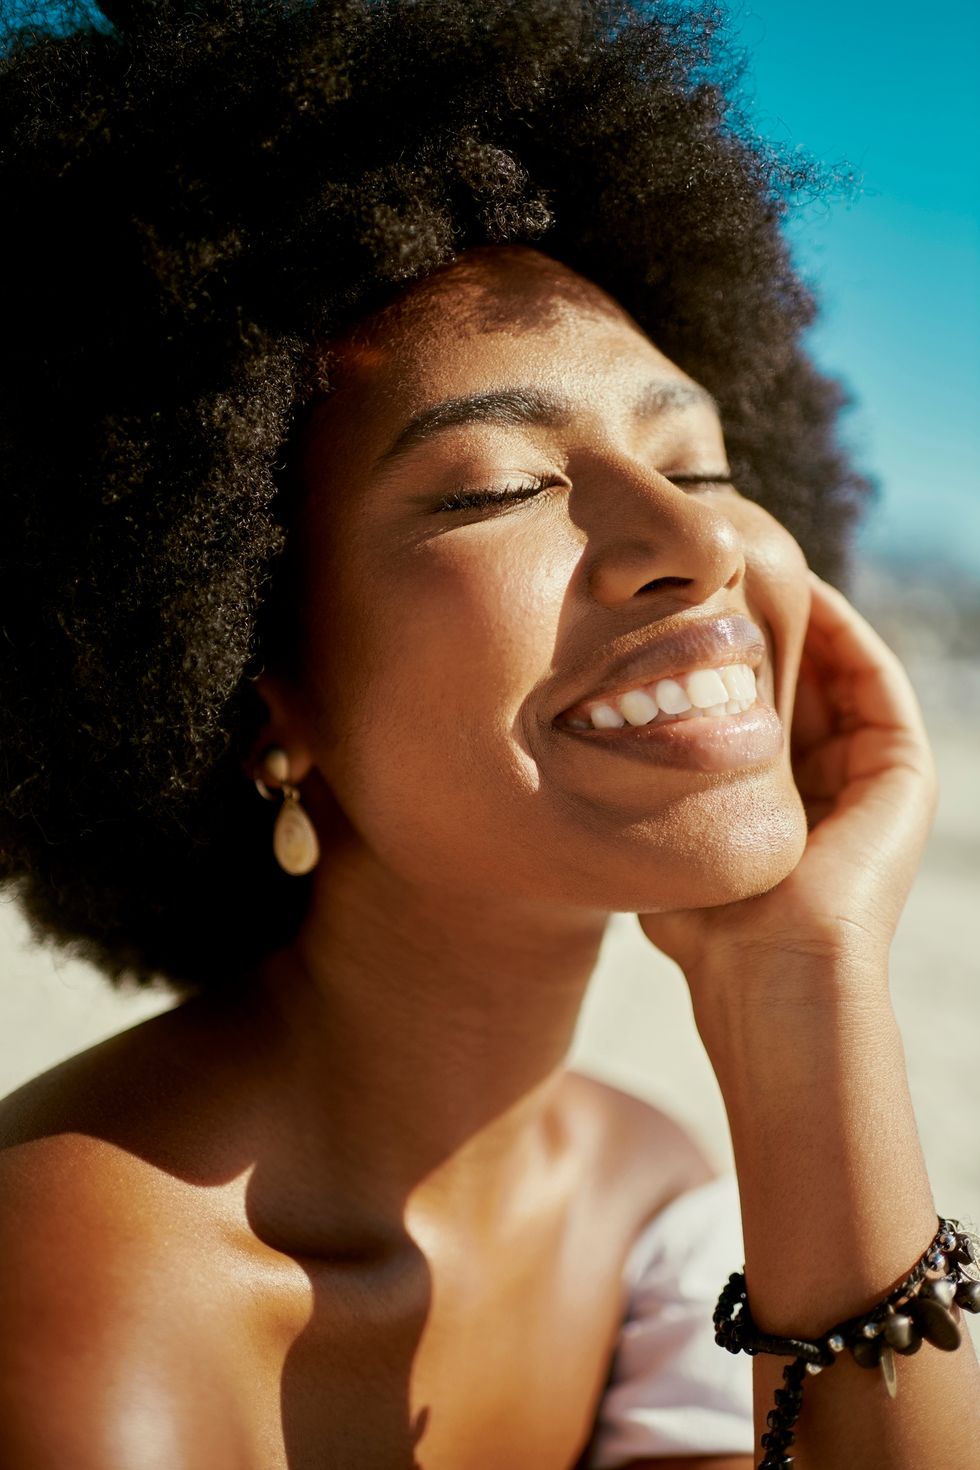 happy, smiling and beautiful woman with an afro closed eyes closeup attractive and stylish young black female wearing makeup with good skin looking stunning enjoying the sun on a summer day